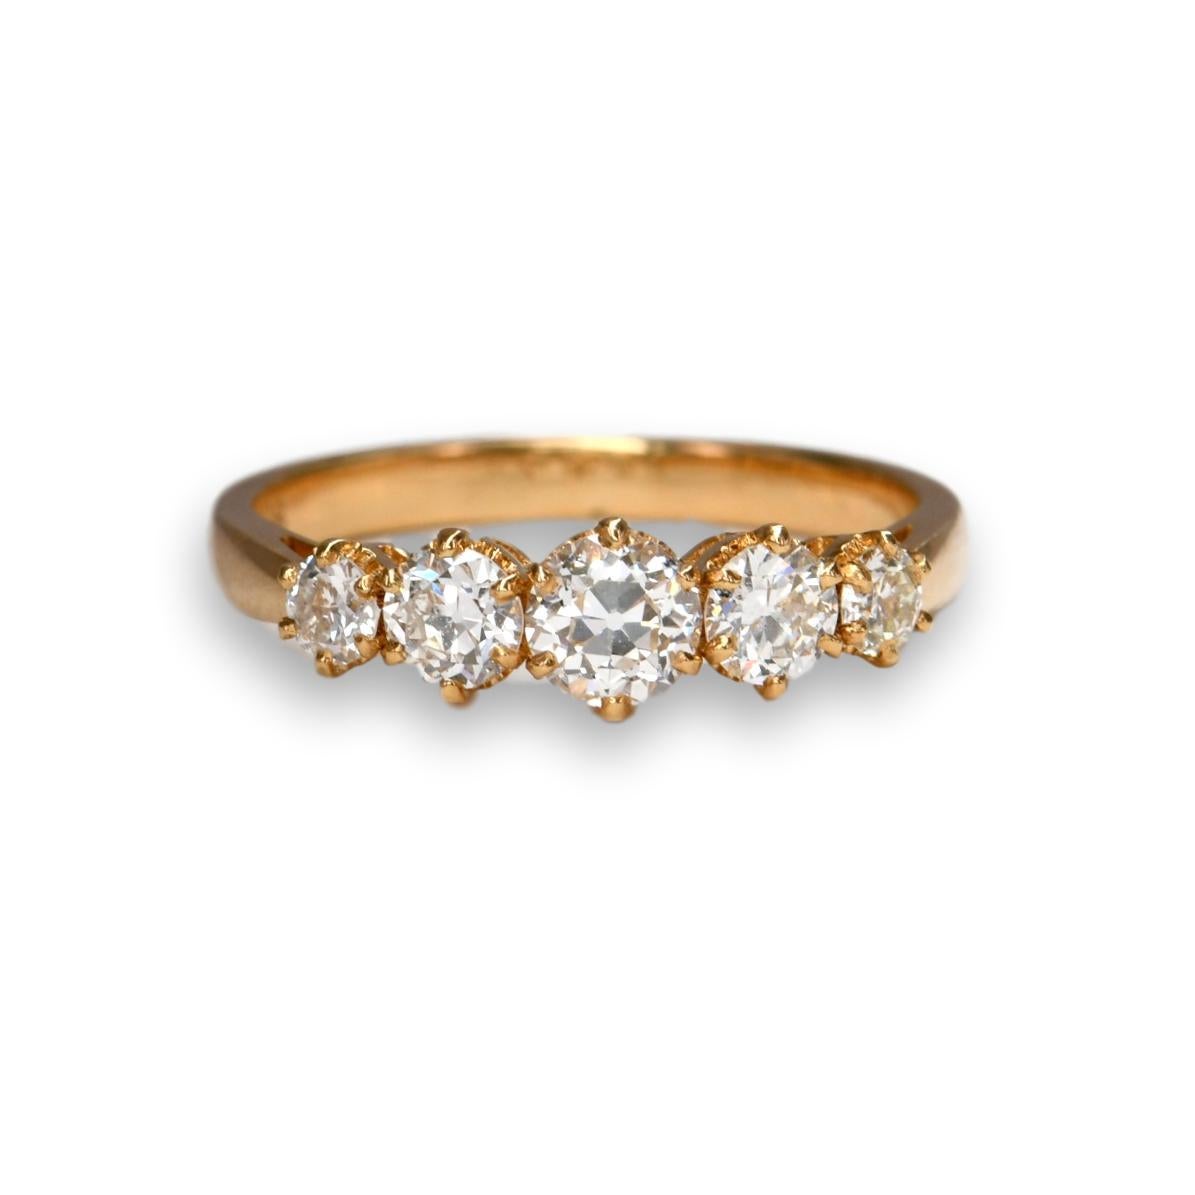 Total Diamonds: 1.25ct
Colour: H 
Clarity: VS
18K Yellow gold
Ring size: UK N, USA 6 1/2

This five stone diamond ring has wonderful lively old European cut diamonds. They catch and reflect the light really showing off the sparkle. The diamonds are